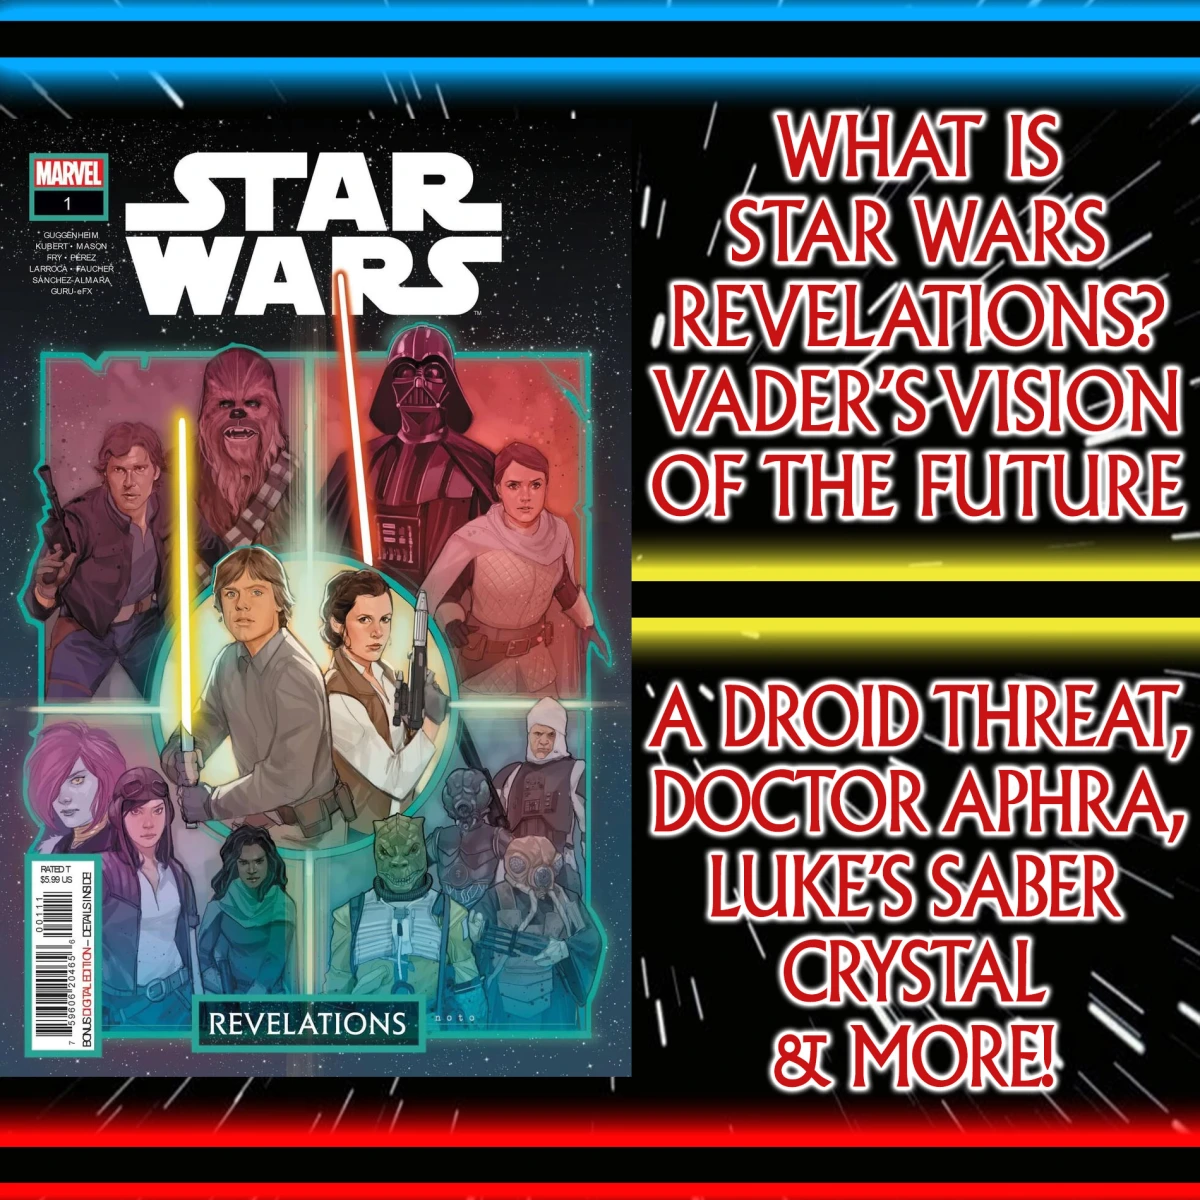 What Is Star Wars Revelations? Vader’s Vision Of The Future; A Droid Threat In Ajax Sigma, Doctor Aphra, Luke’s Lightsaber Crystal & More (Star Wars Revelations 1) – Ep 120